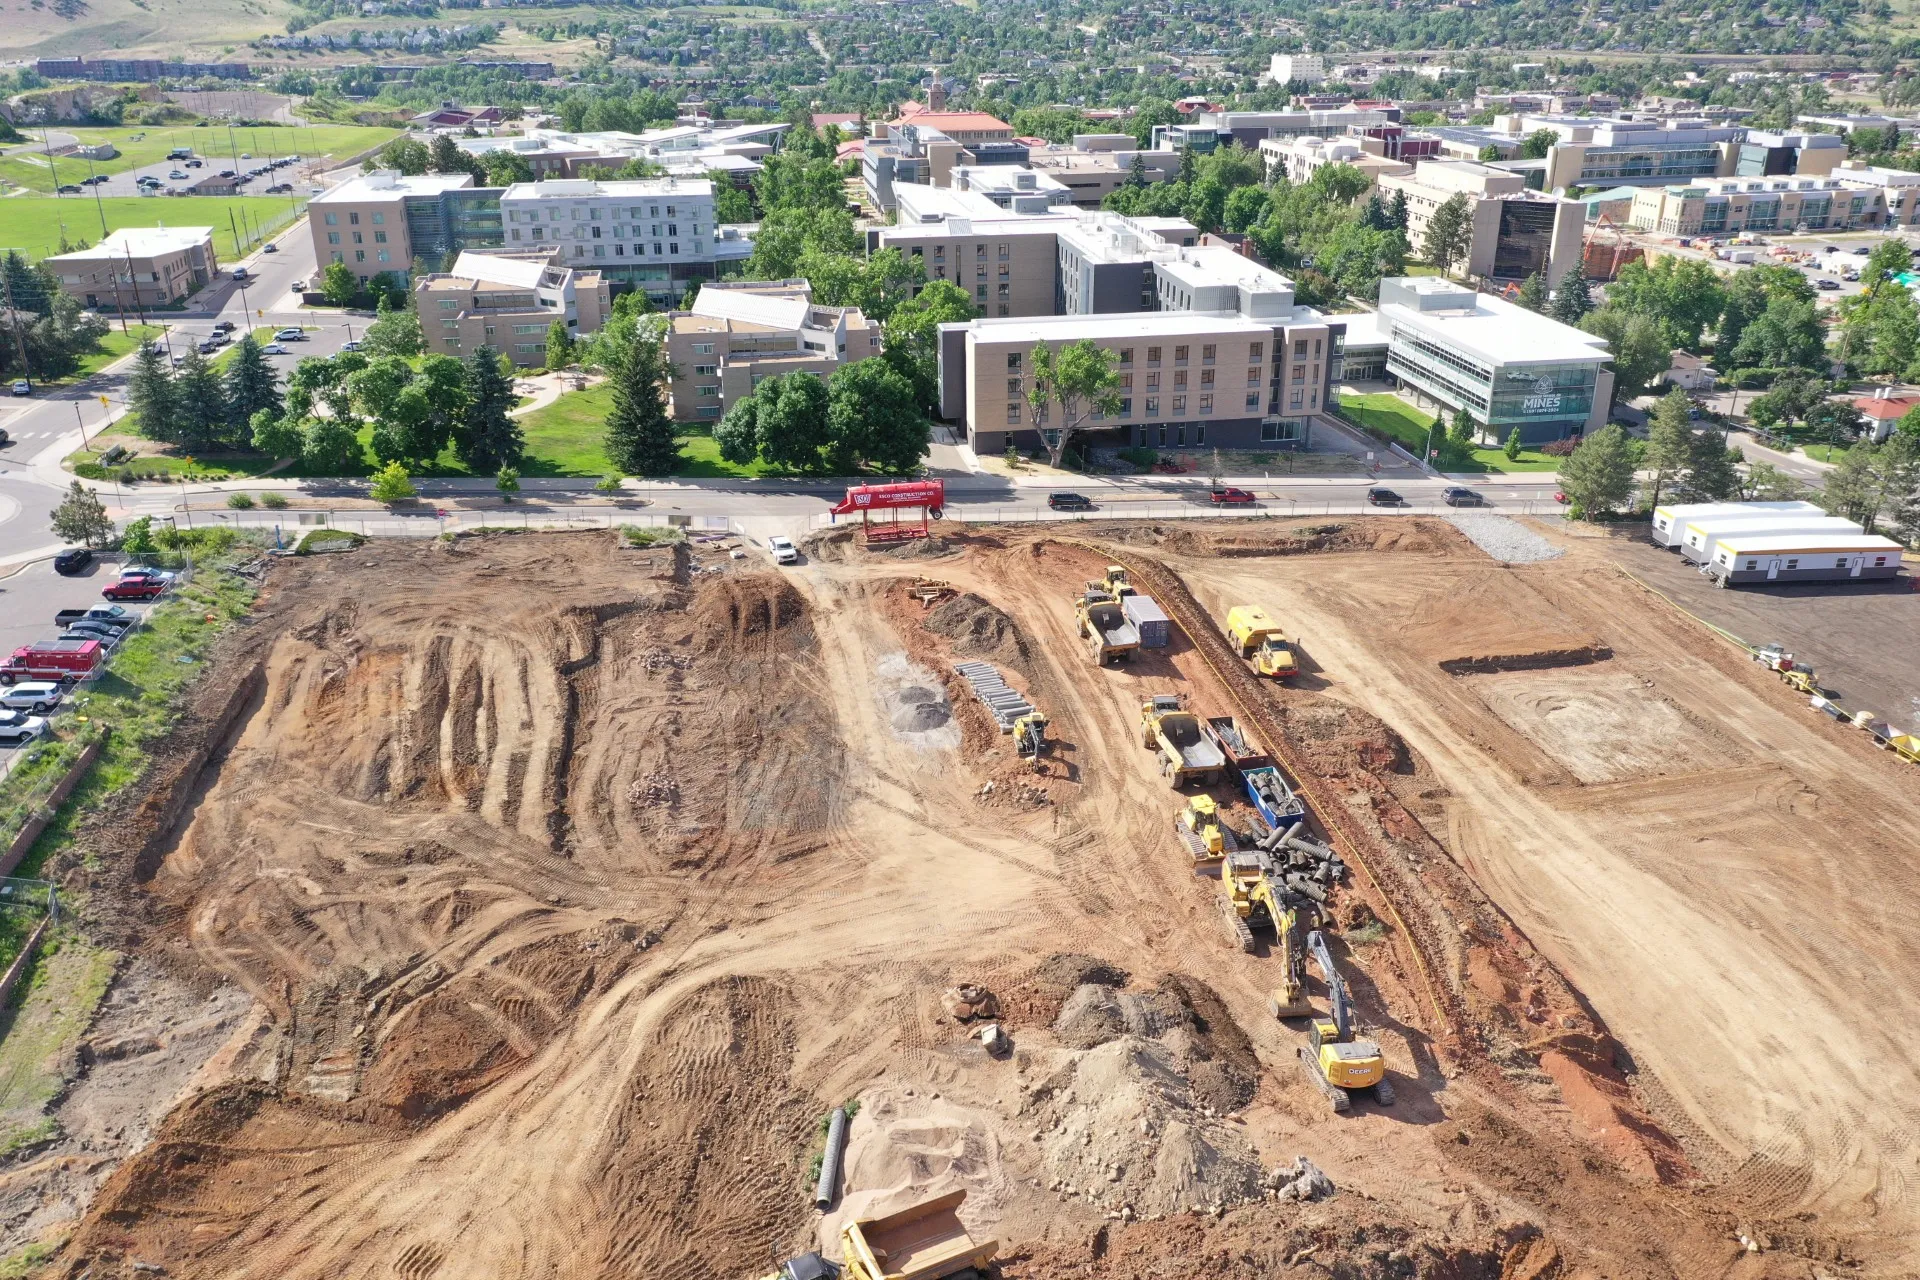 Earth grading underway at Mines construction site--CSM campus in the background.